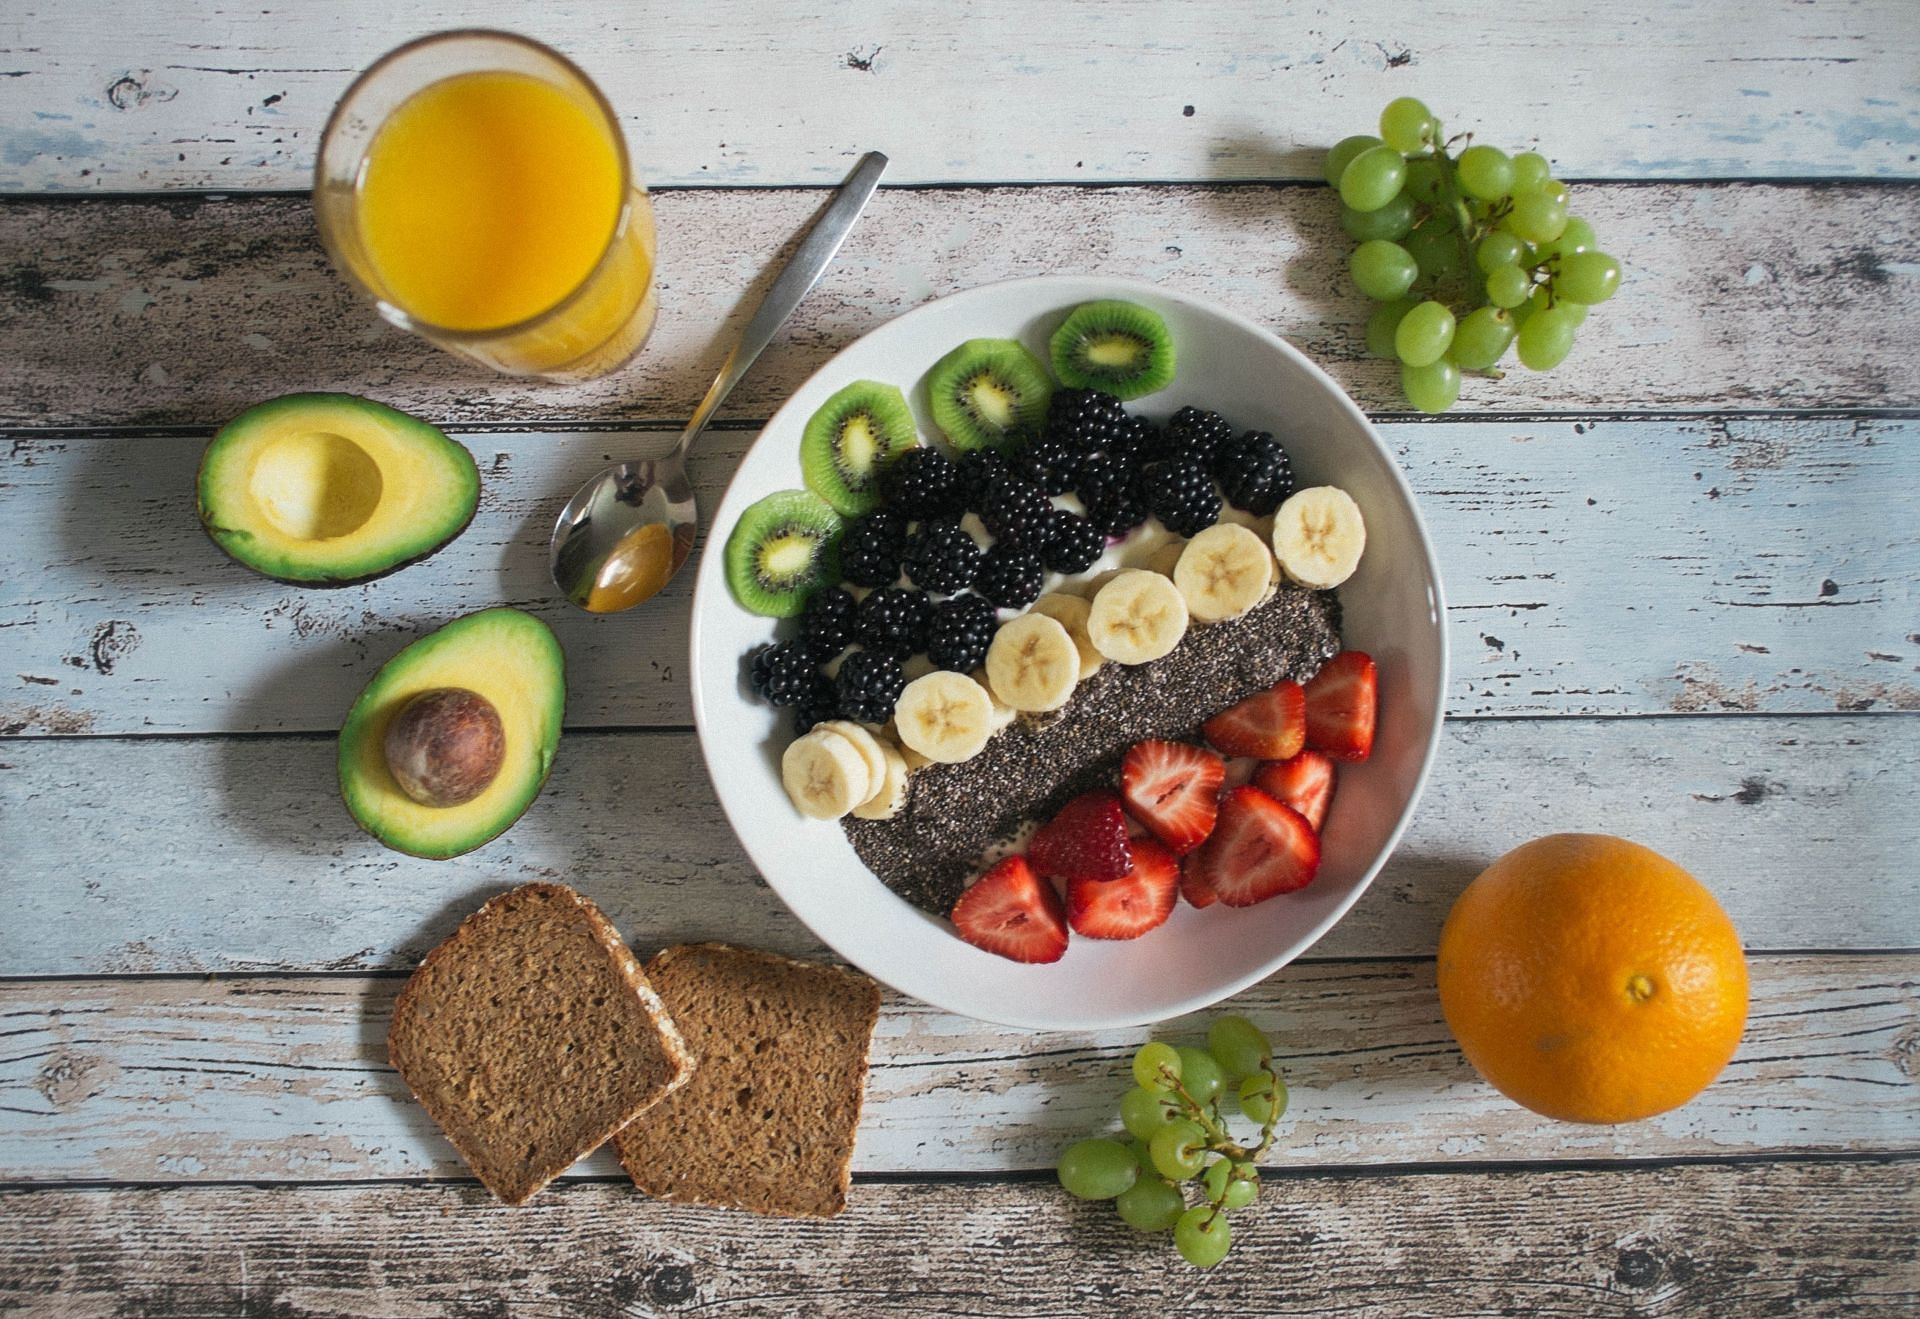 Depending on the intensity and duration of your morning workout and your energy requirements, you should adjust the size of your pre-workout meal. (Image via Unsplash/ Jannis Brandt)